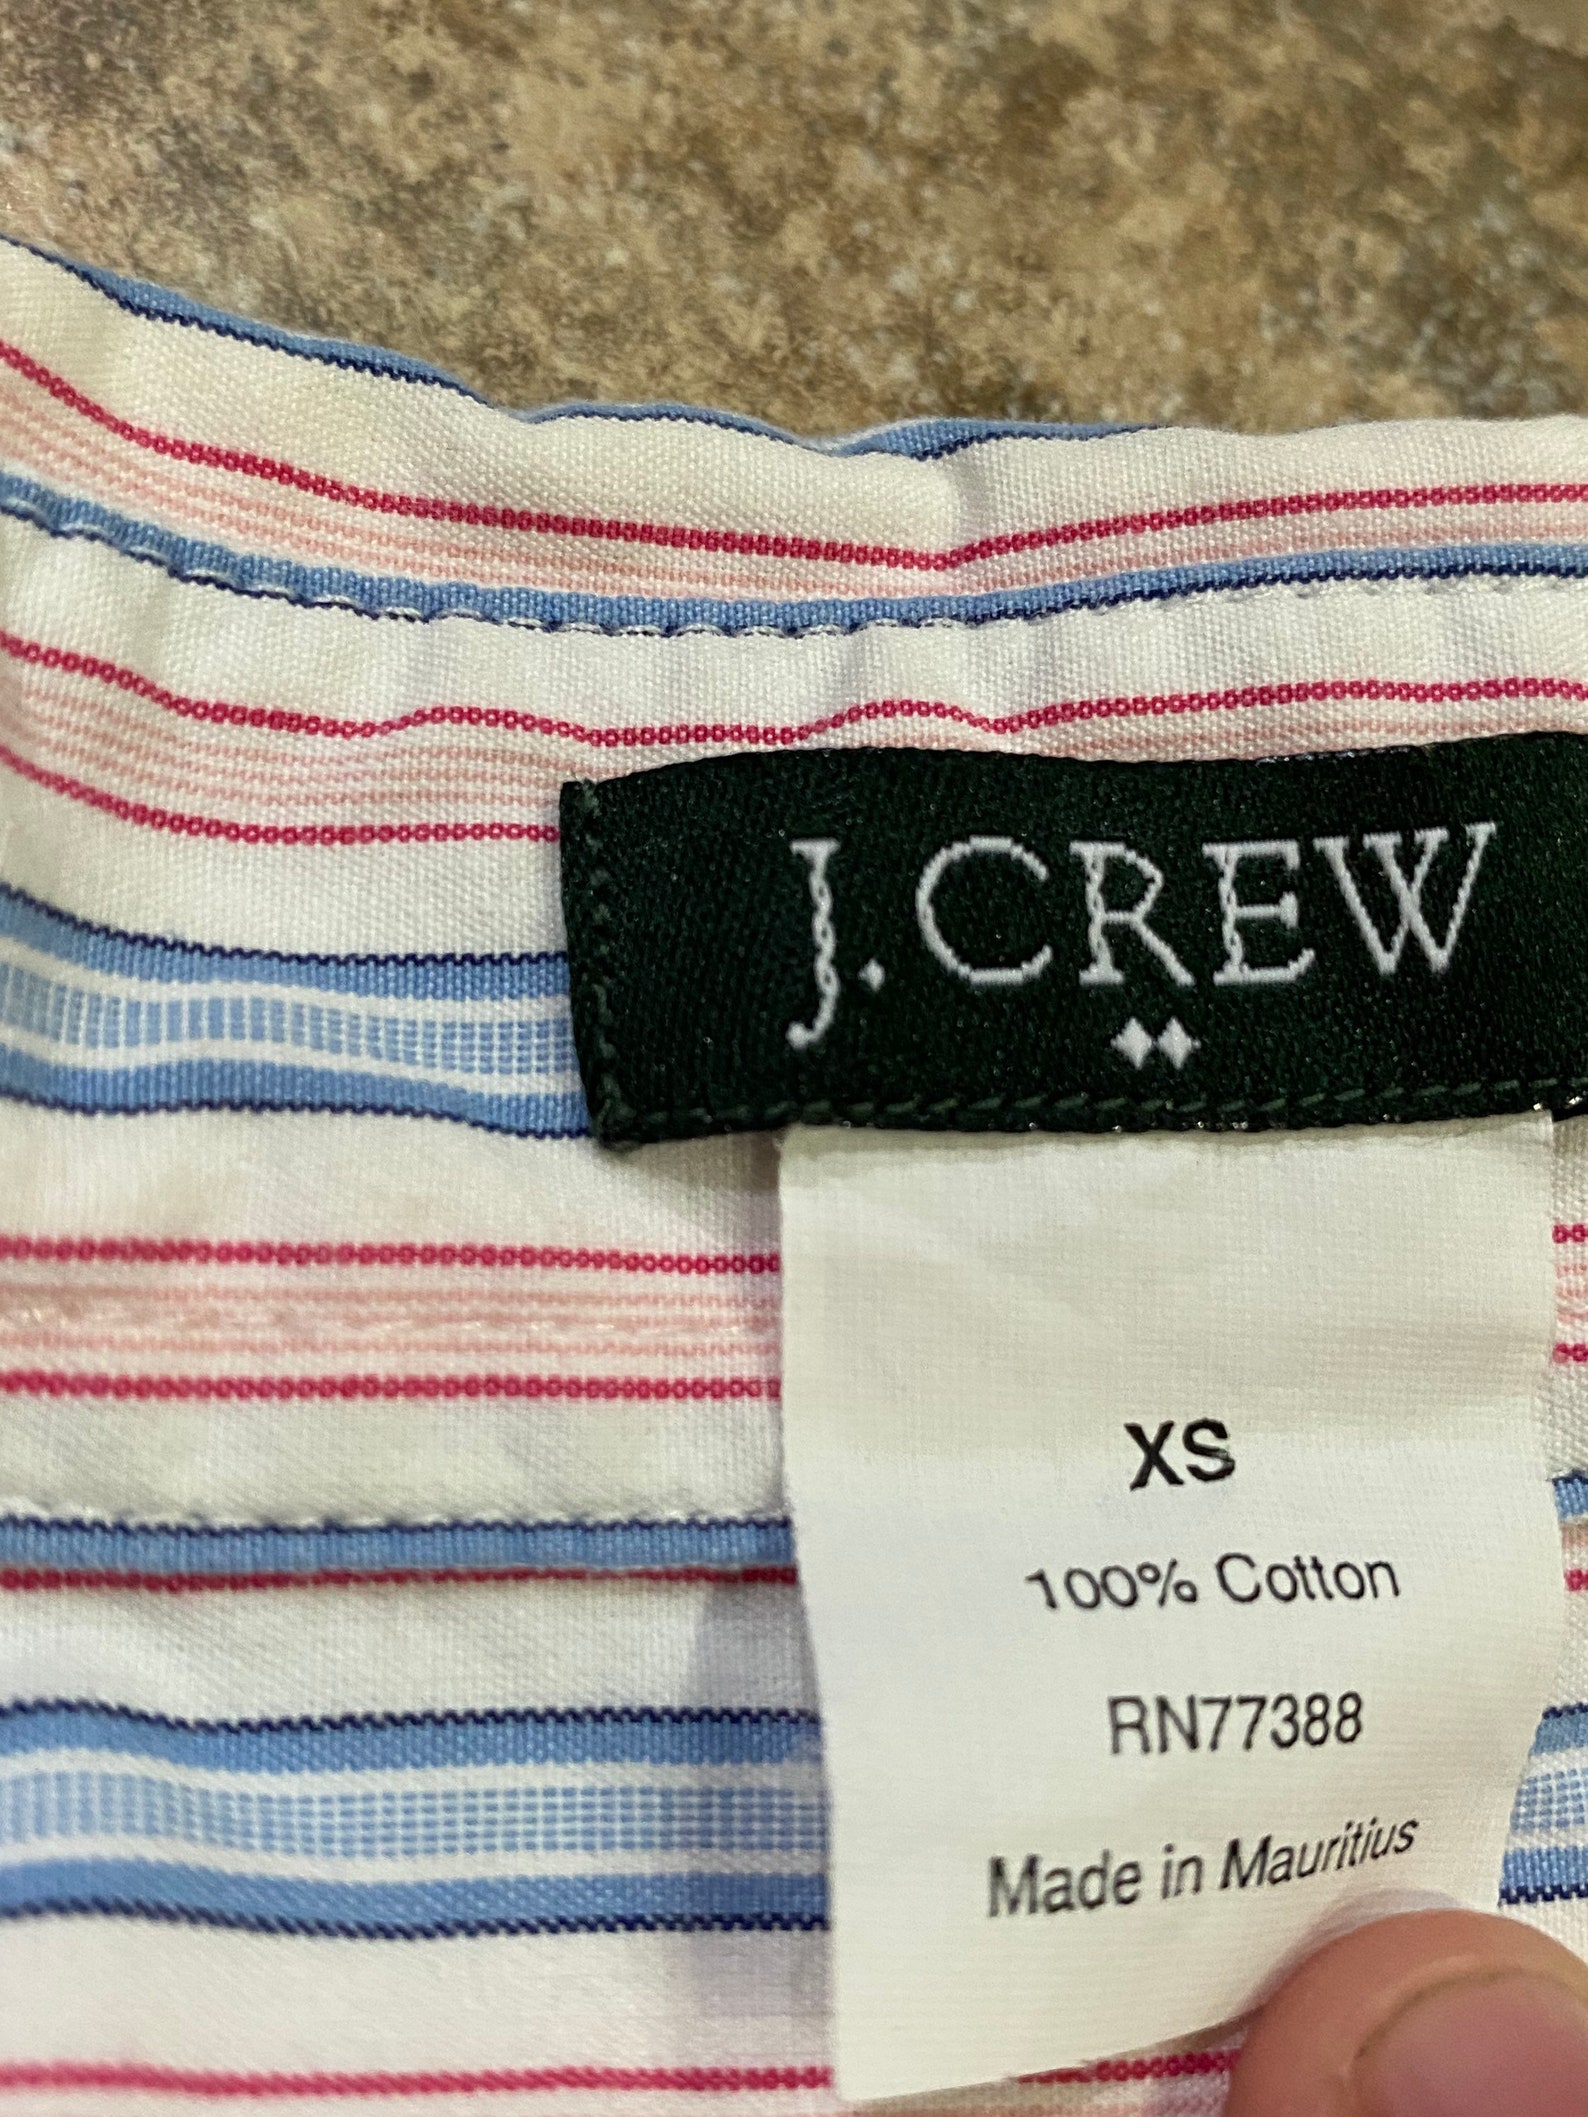 J. CREW Work Shirt RN 77388 Long Sleeve Button Up Striped | Etsy